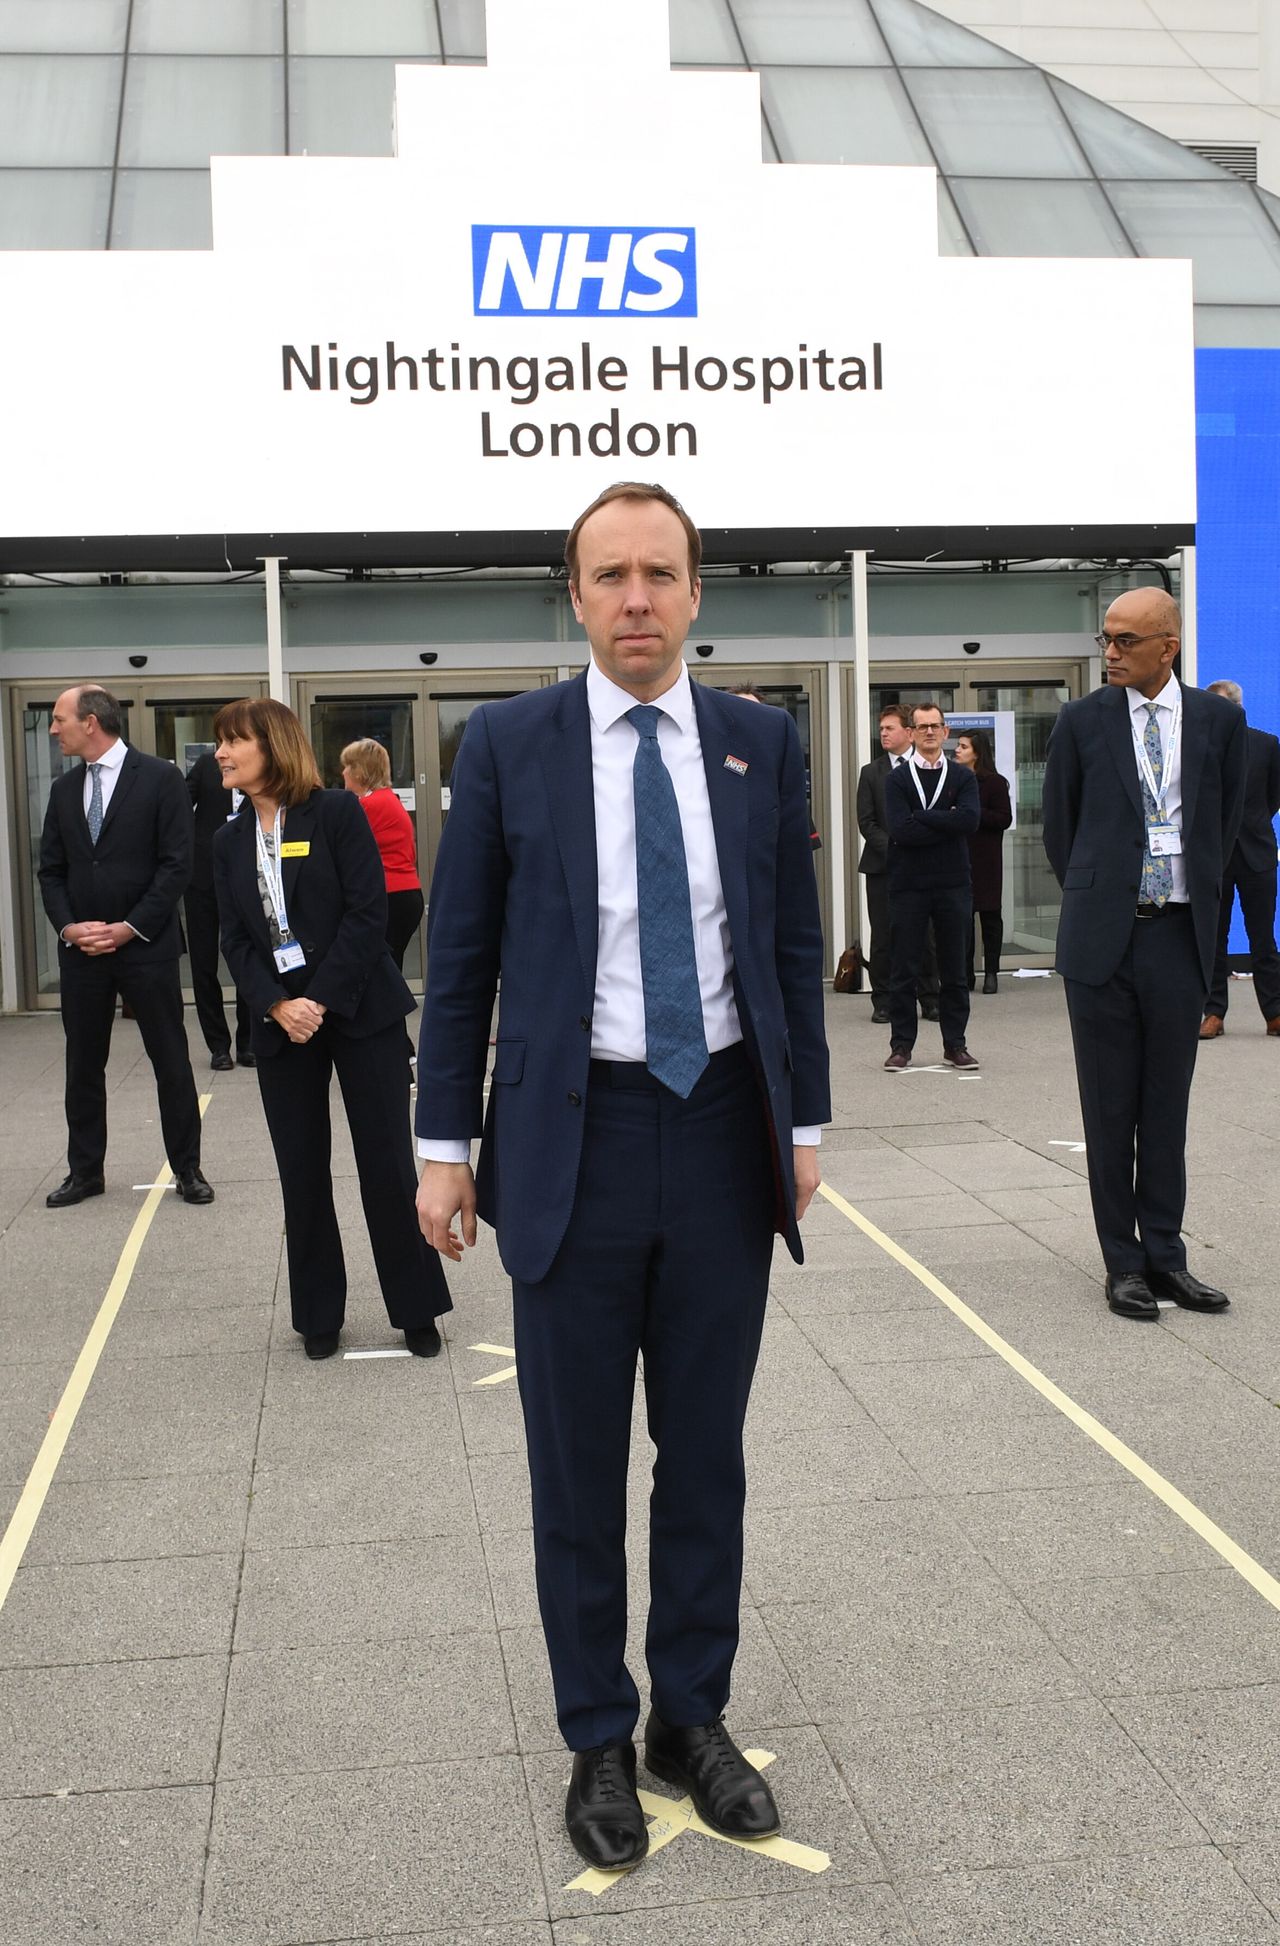 Health secretary Matt Hancock and NHS staff stand on marks on the ground to ensure social distancing guidelines are adhered to at the opening of the NHS Nightingale Hospital at the Excel centre in London